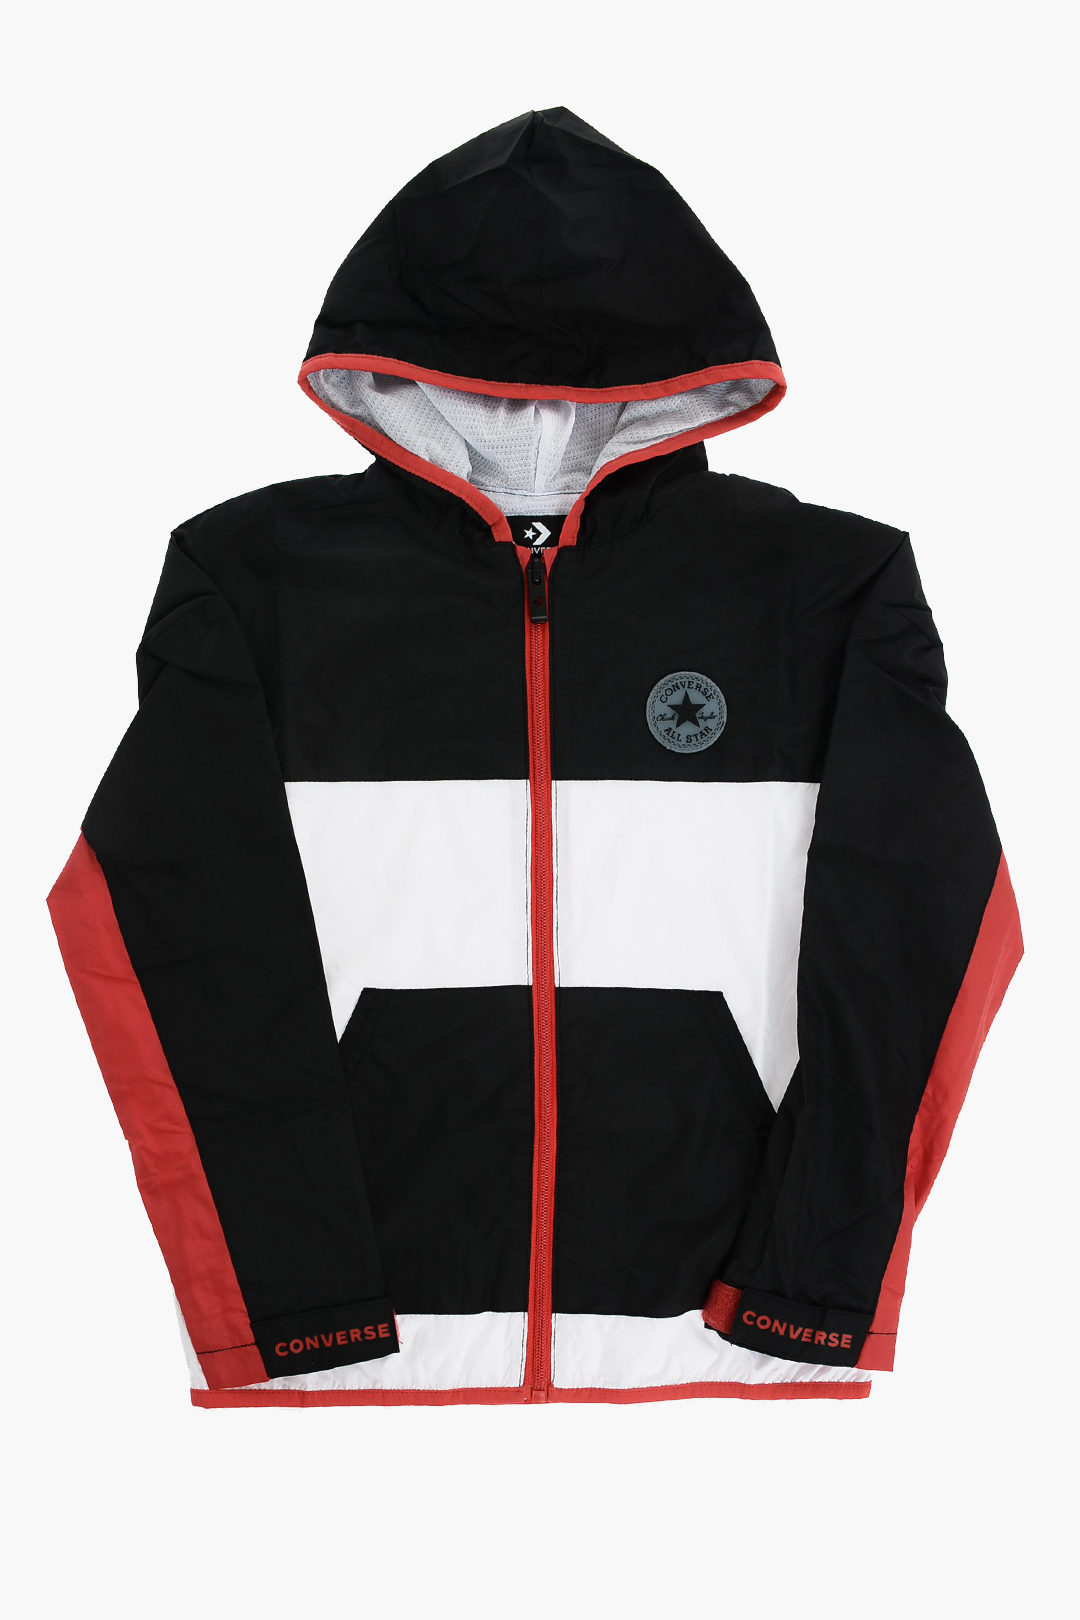 Converse KIDS ALL STAR Hoodie Jacket boys - Glamood Outlet